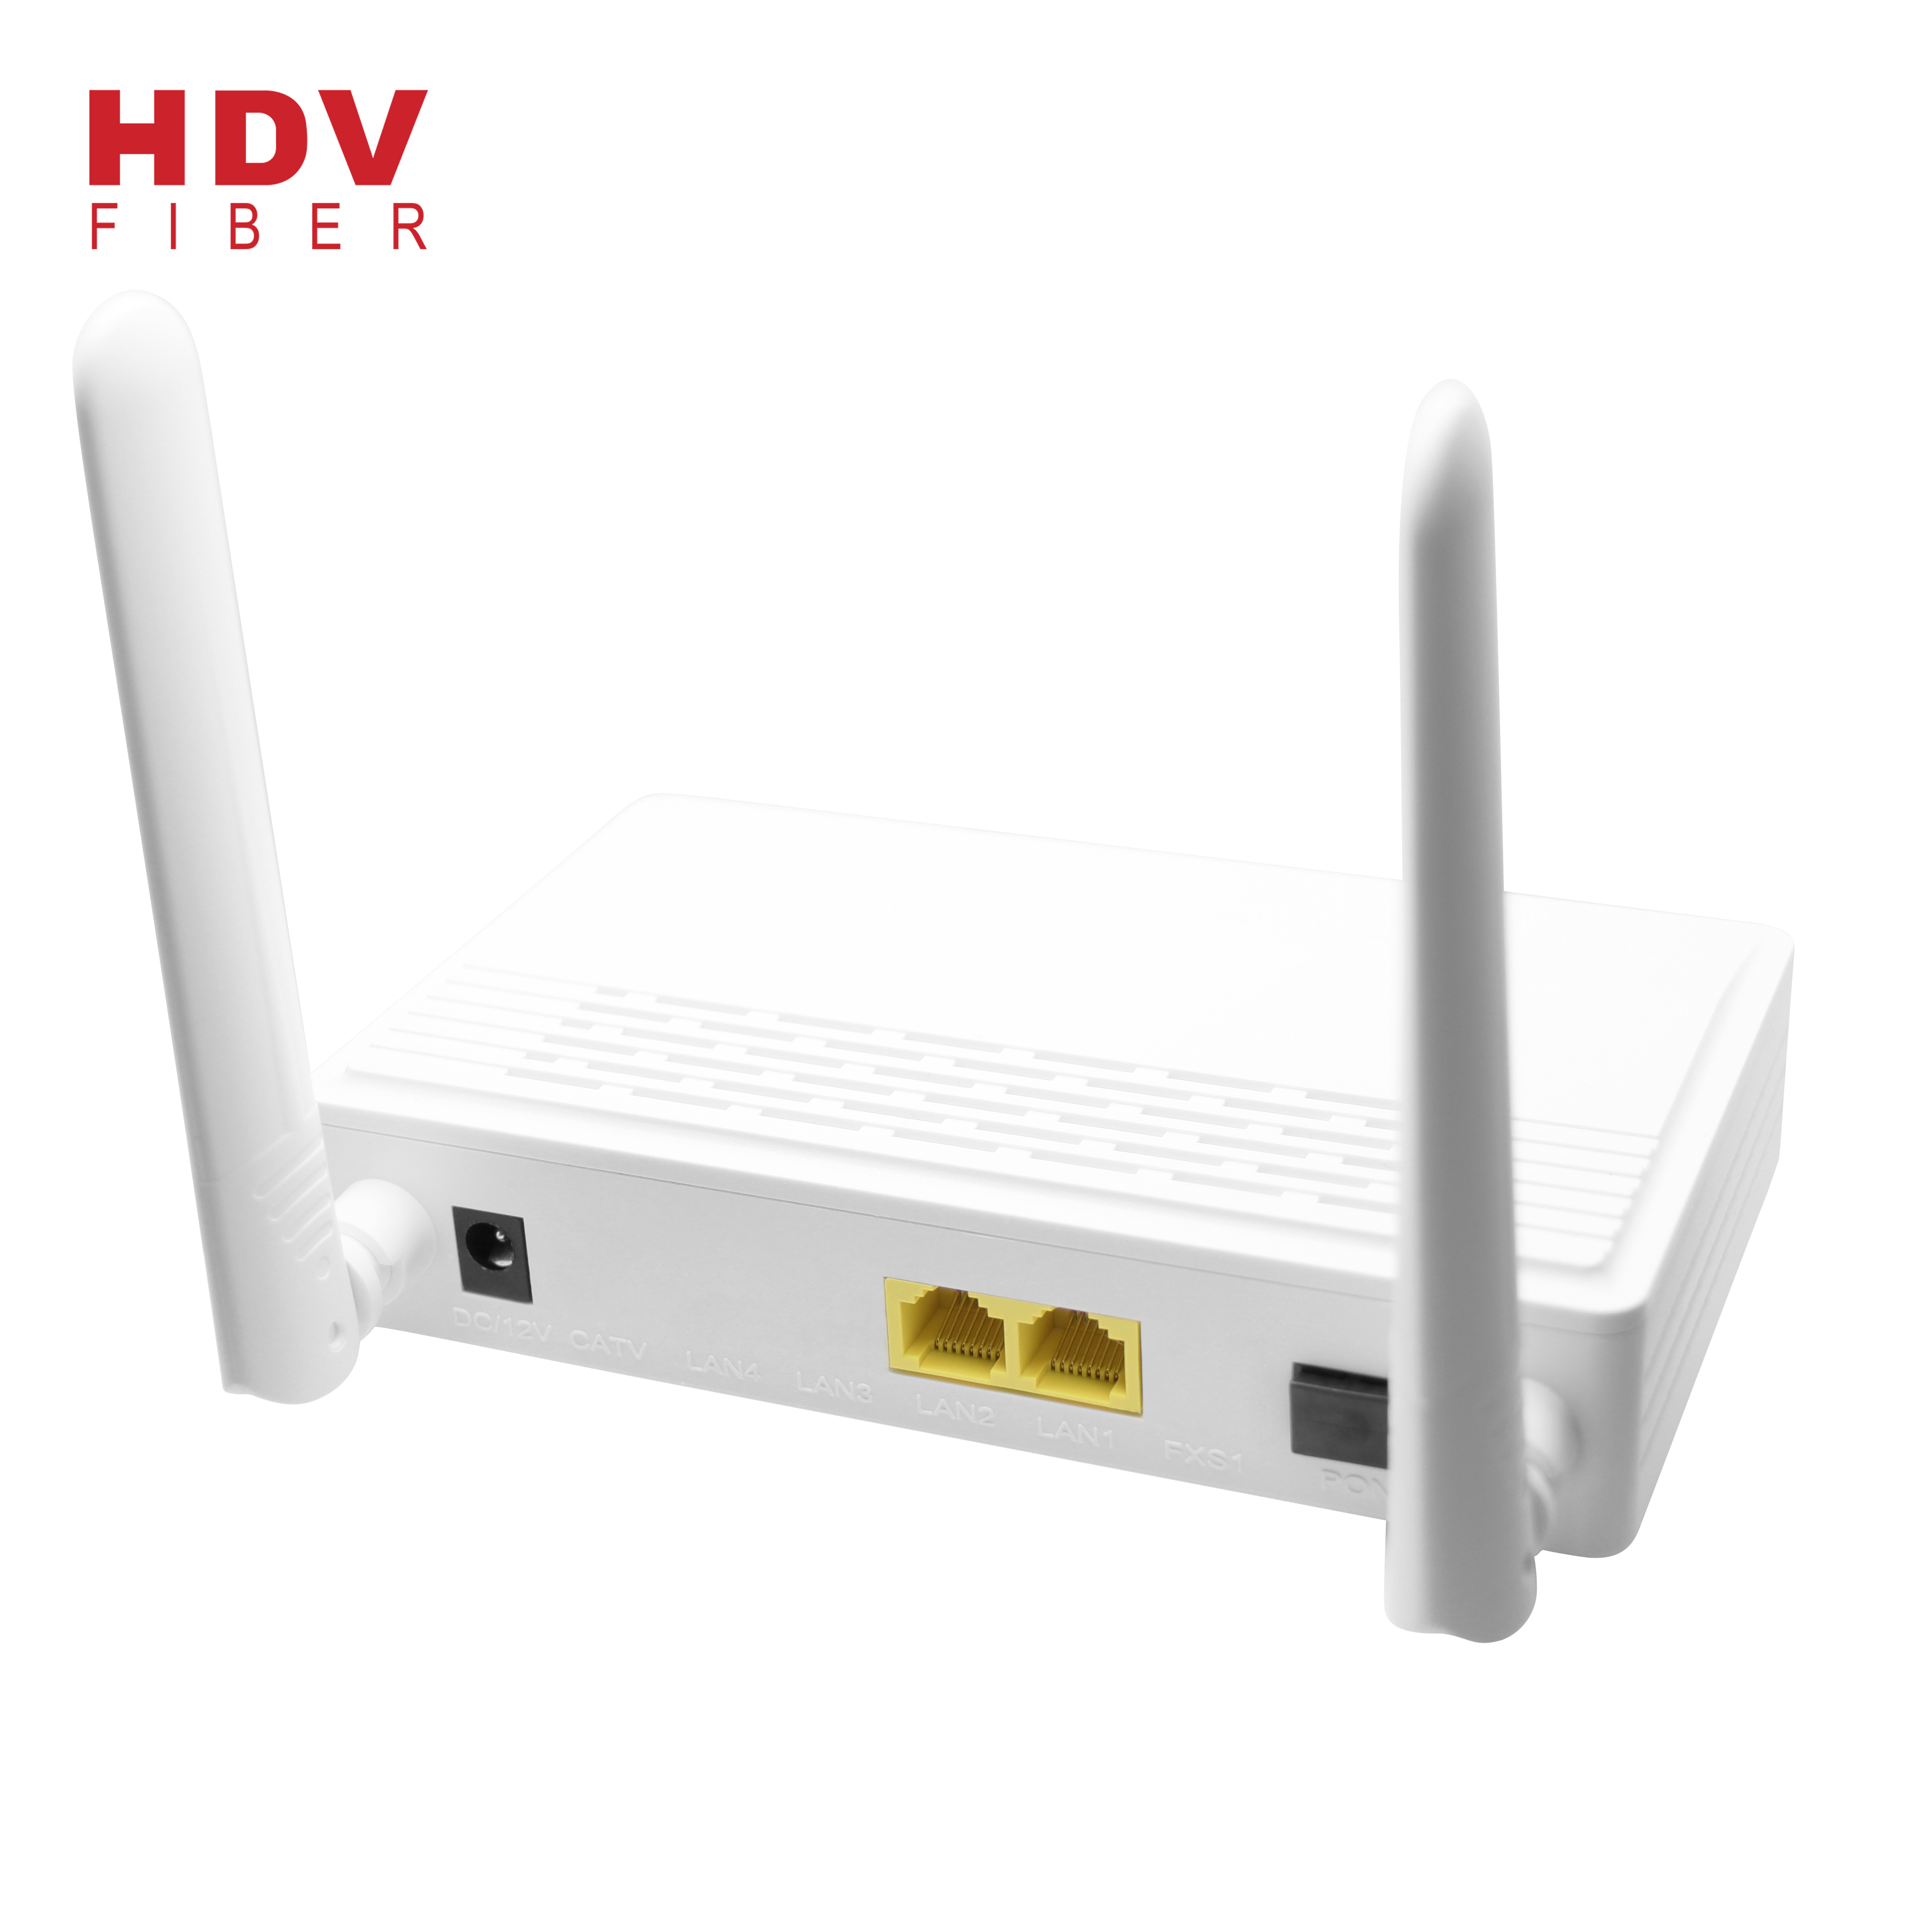 controller nobody Bitterness China Chinese wholesale Fiber Optic Converter - FTTH Telecom Equipment  1GE+1FE+ WIFI zte Huawei GPON ONT ONU – HDV Manufacturer and Supplier | HDV